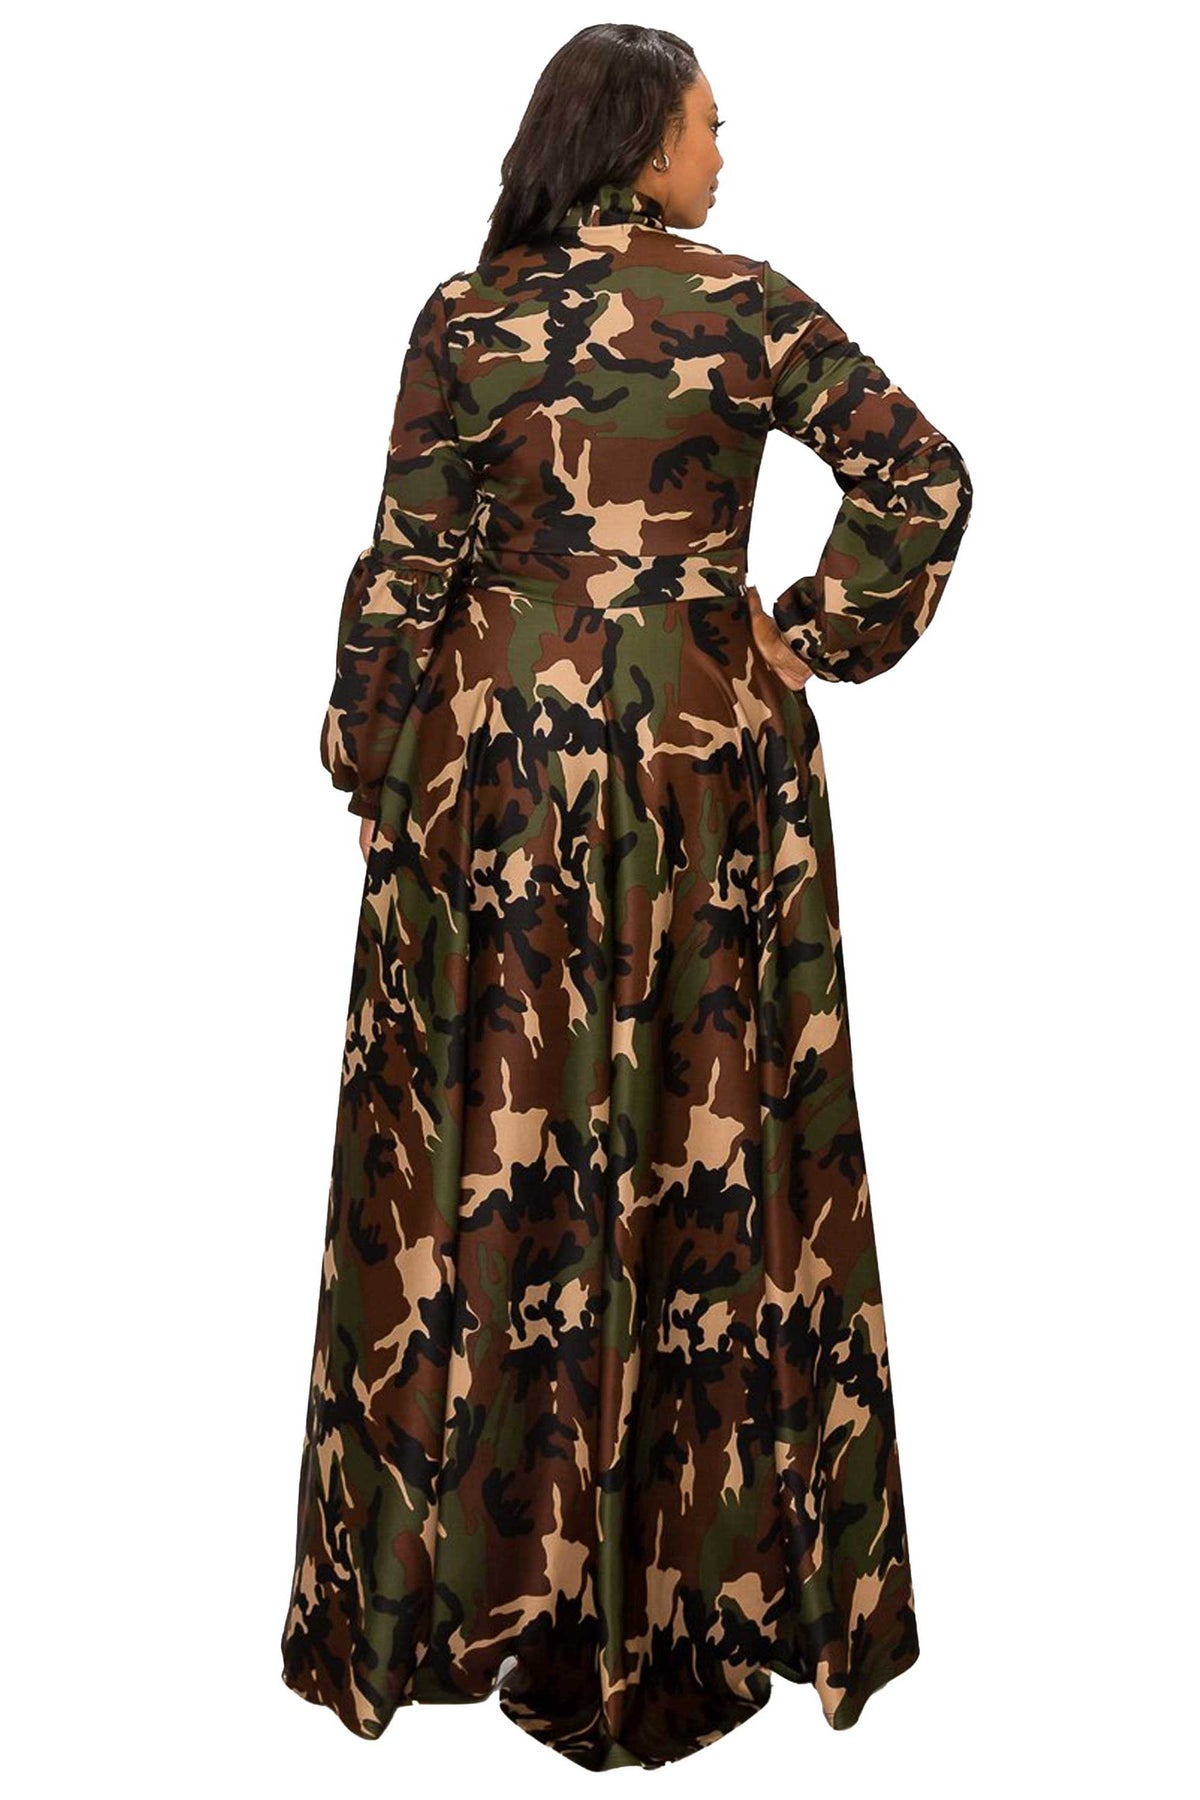 Camo Bella Donna Dress with Ribbon and Puffed Out Sleeves